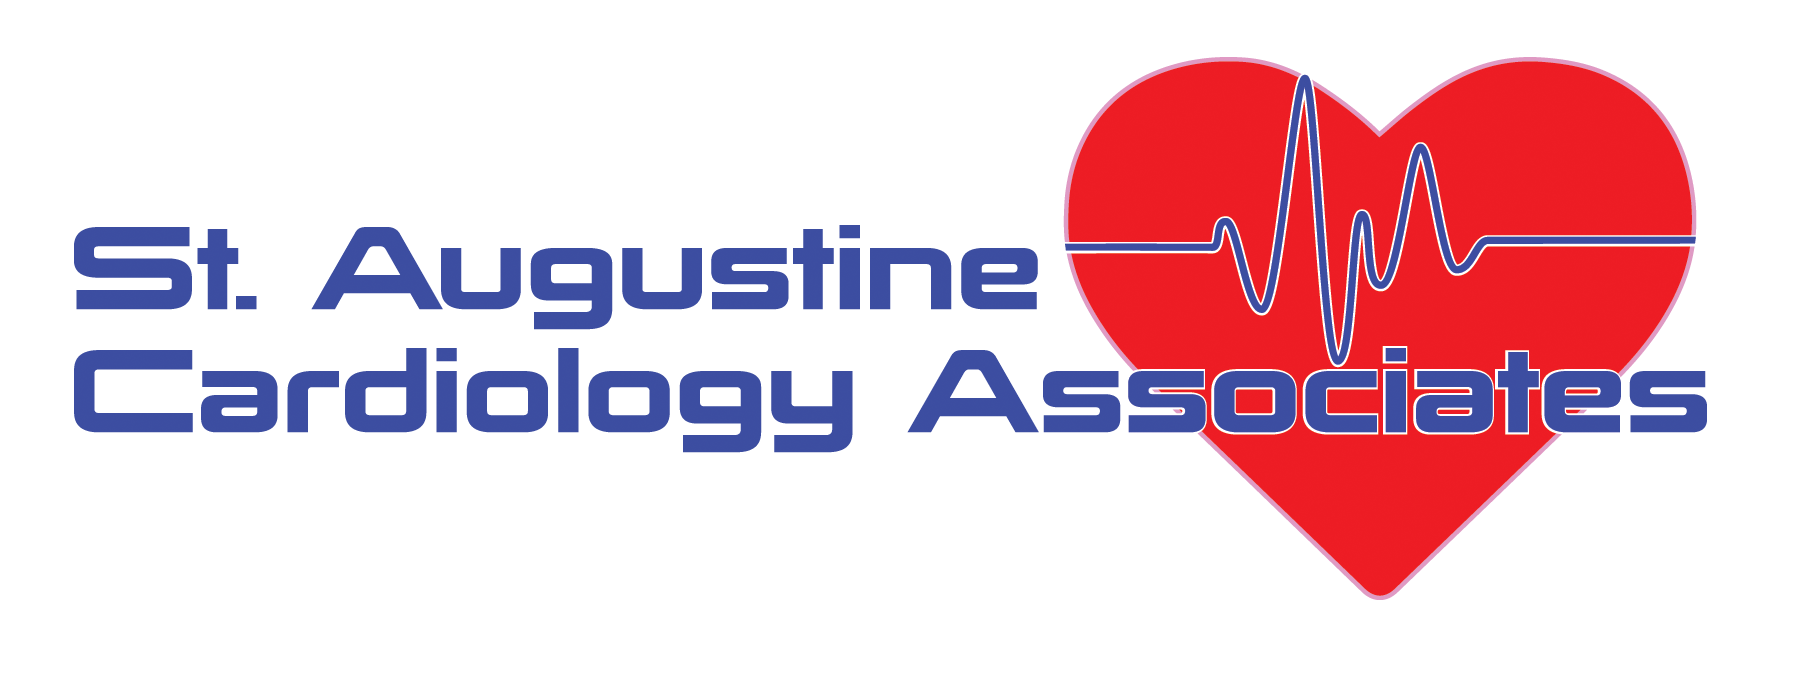 St. Augustine Cardiology